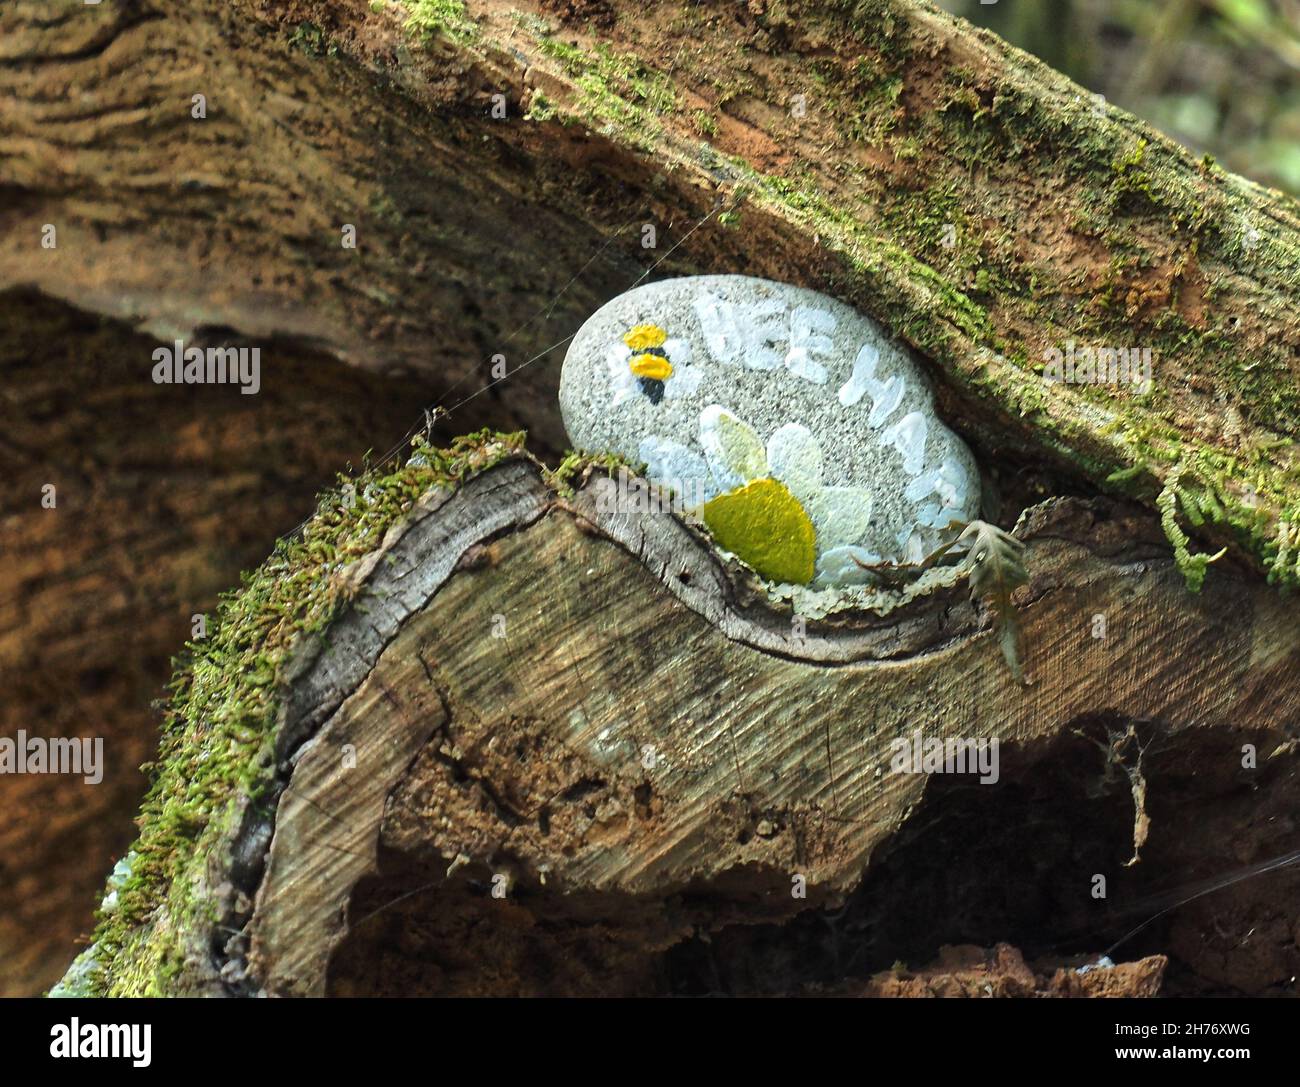 A painted rock placed in a tree trunk. Stock Photo